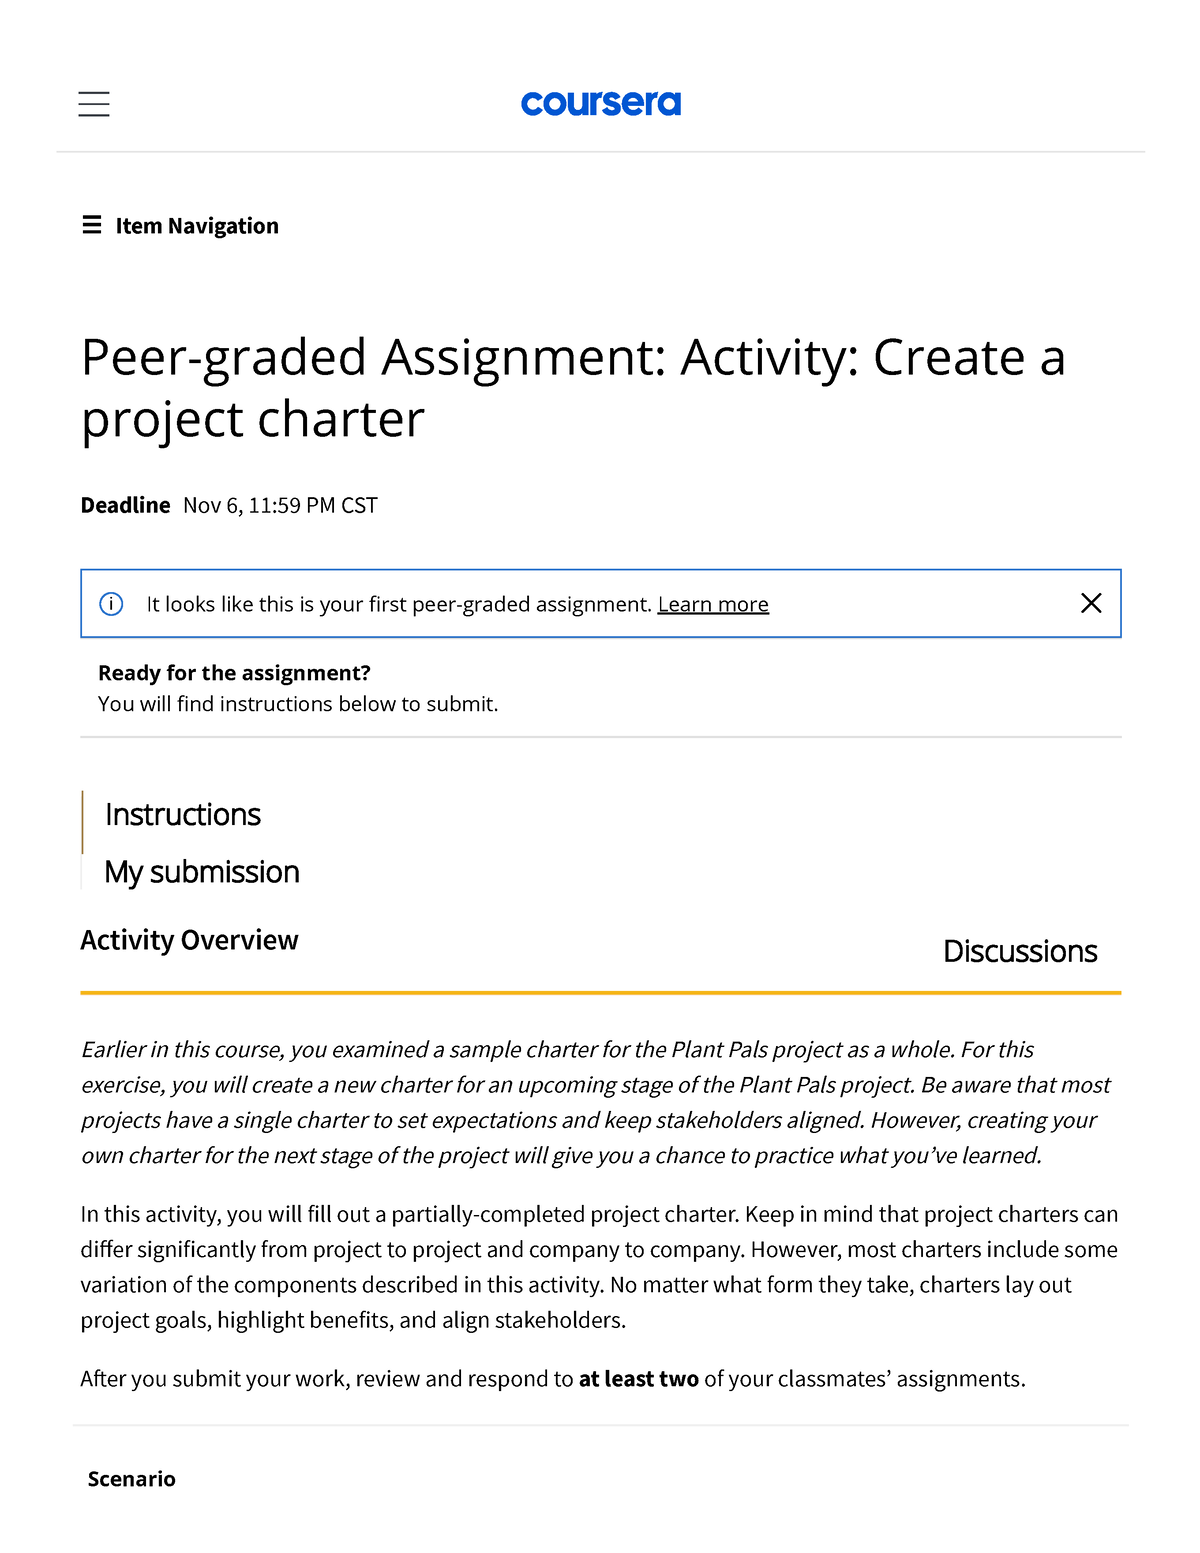 how to upload peer graded assignment in coursera